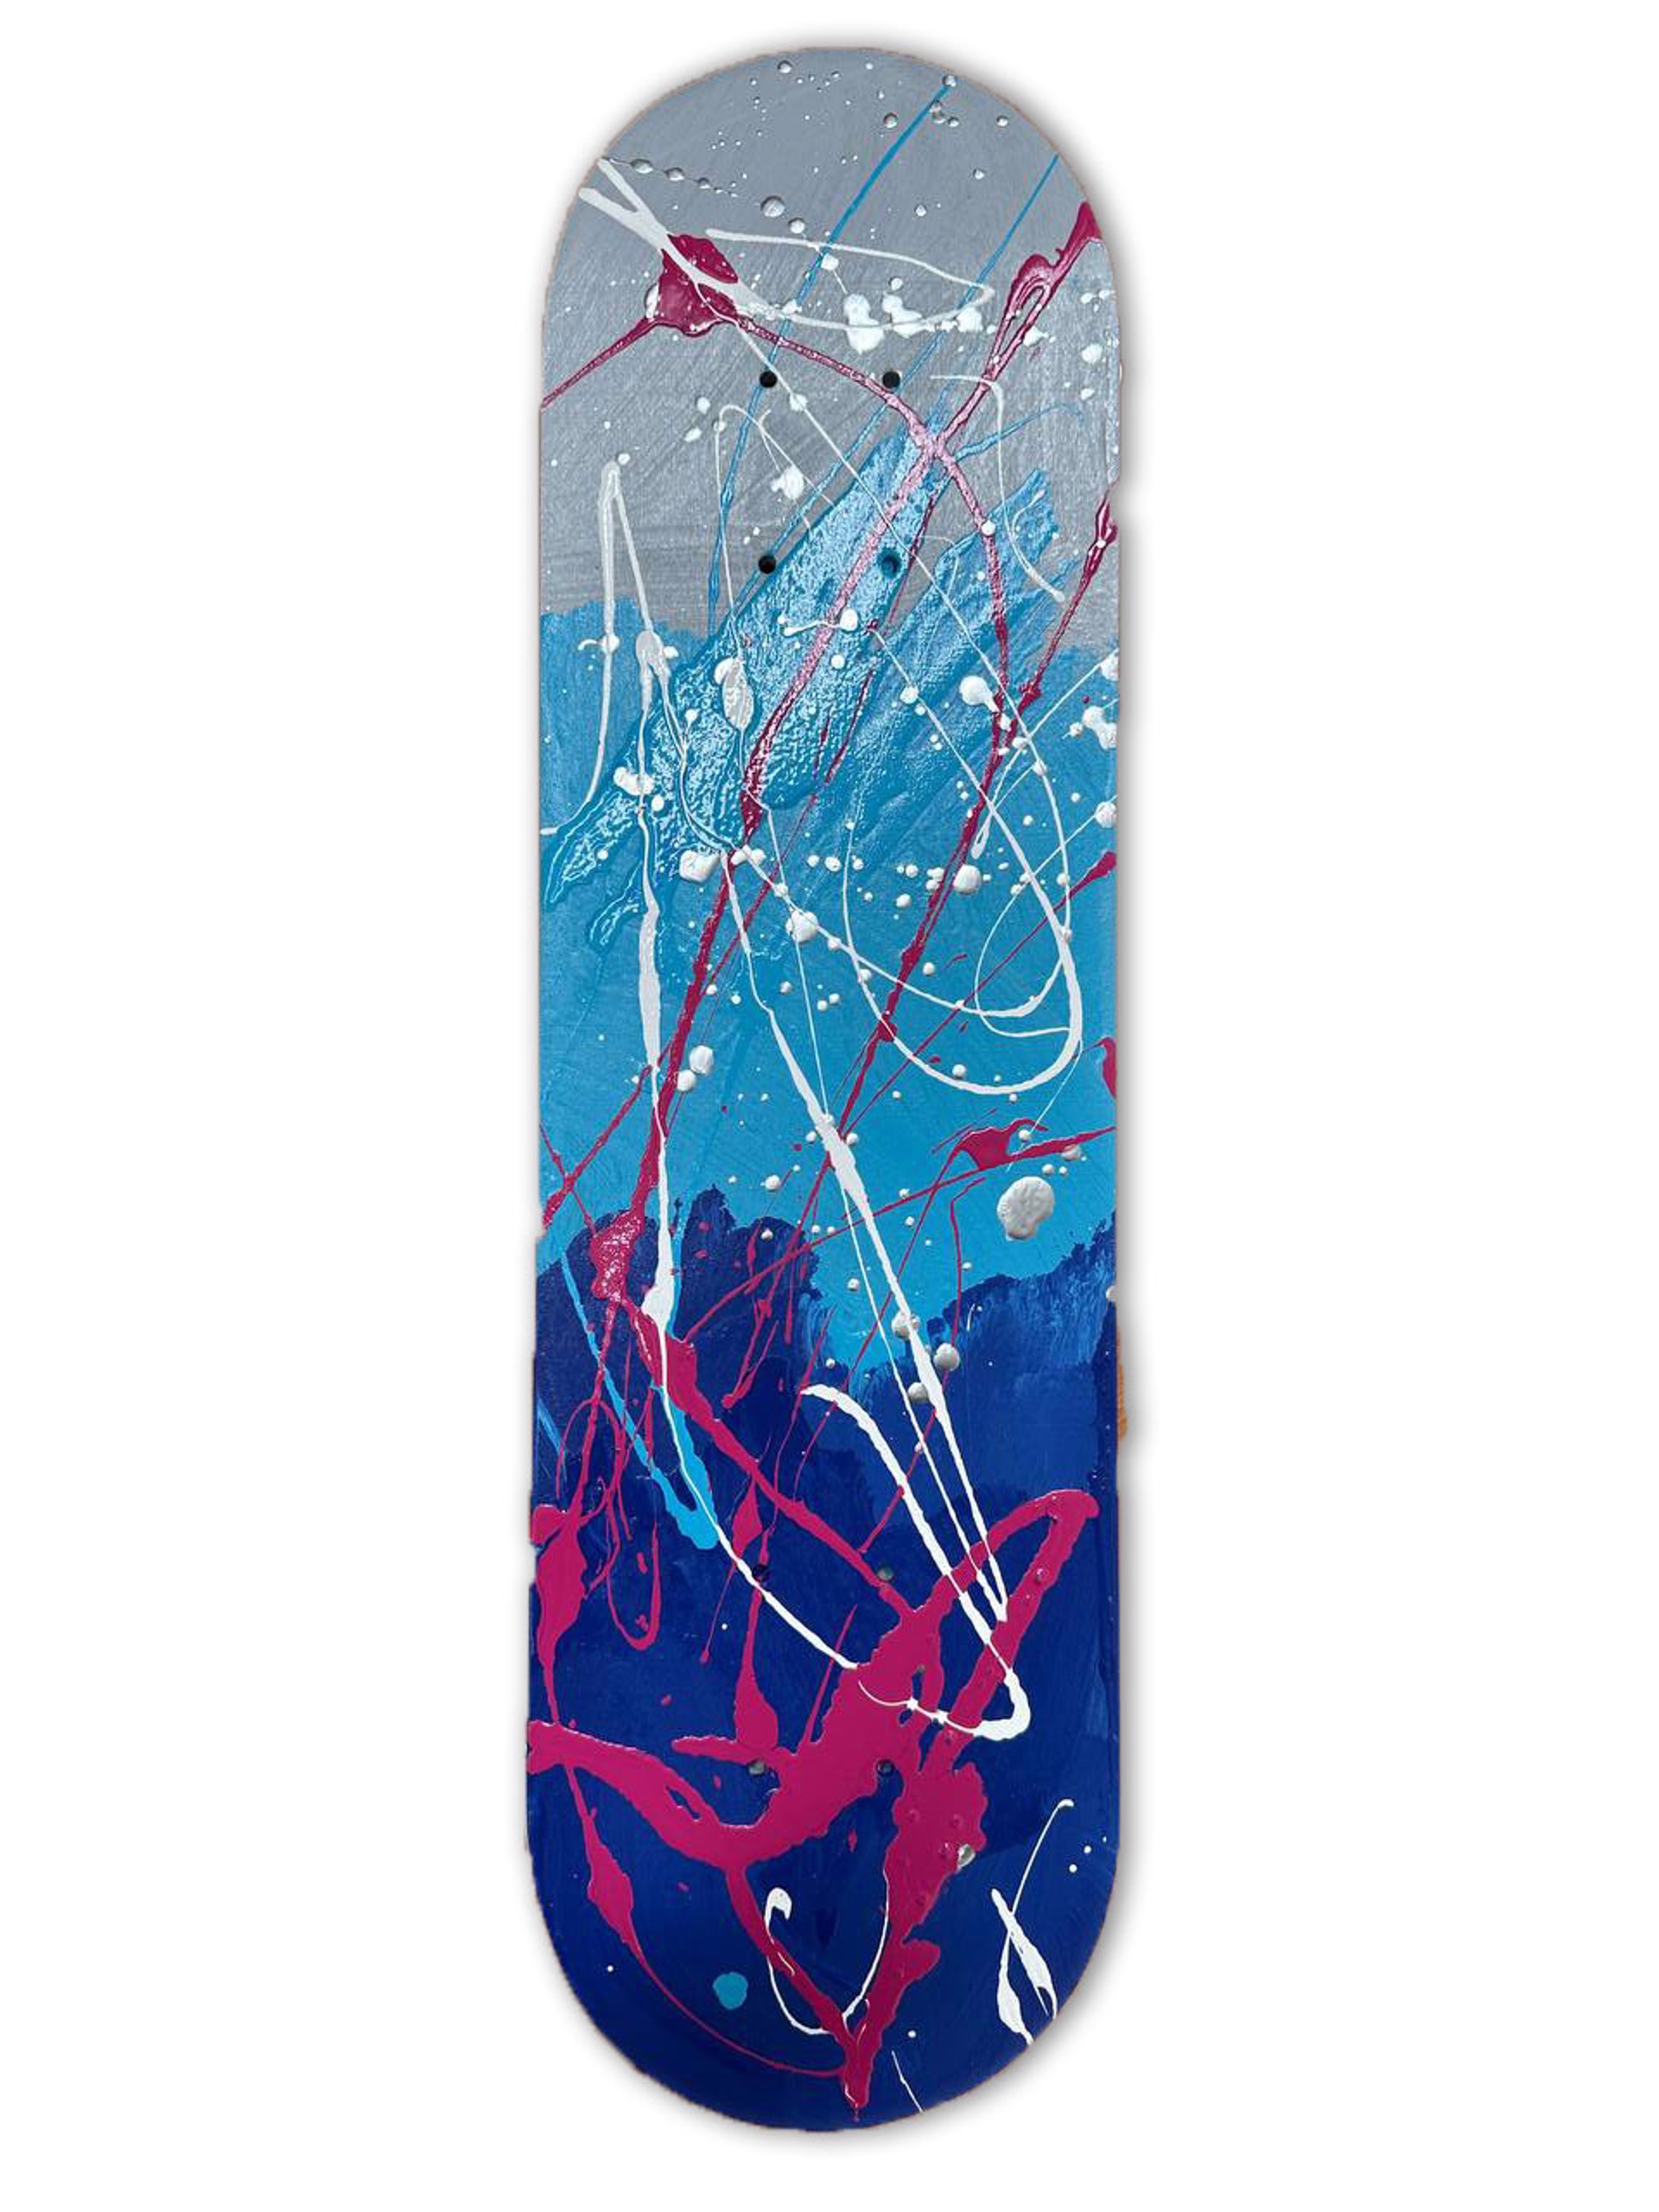 "Abstract Skateboard IV (Colorful)" by Abstract Skateboards Wall Sculptures by Elena Bulatova